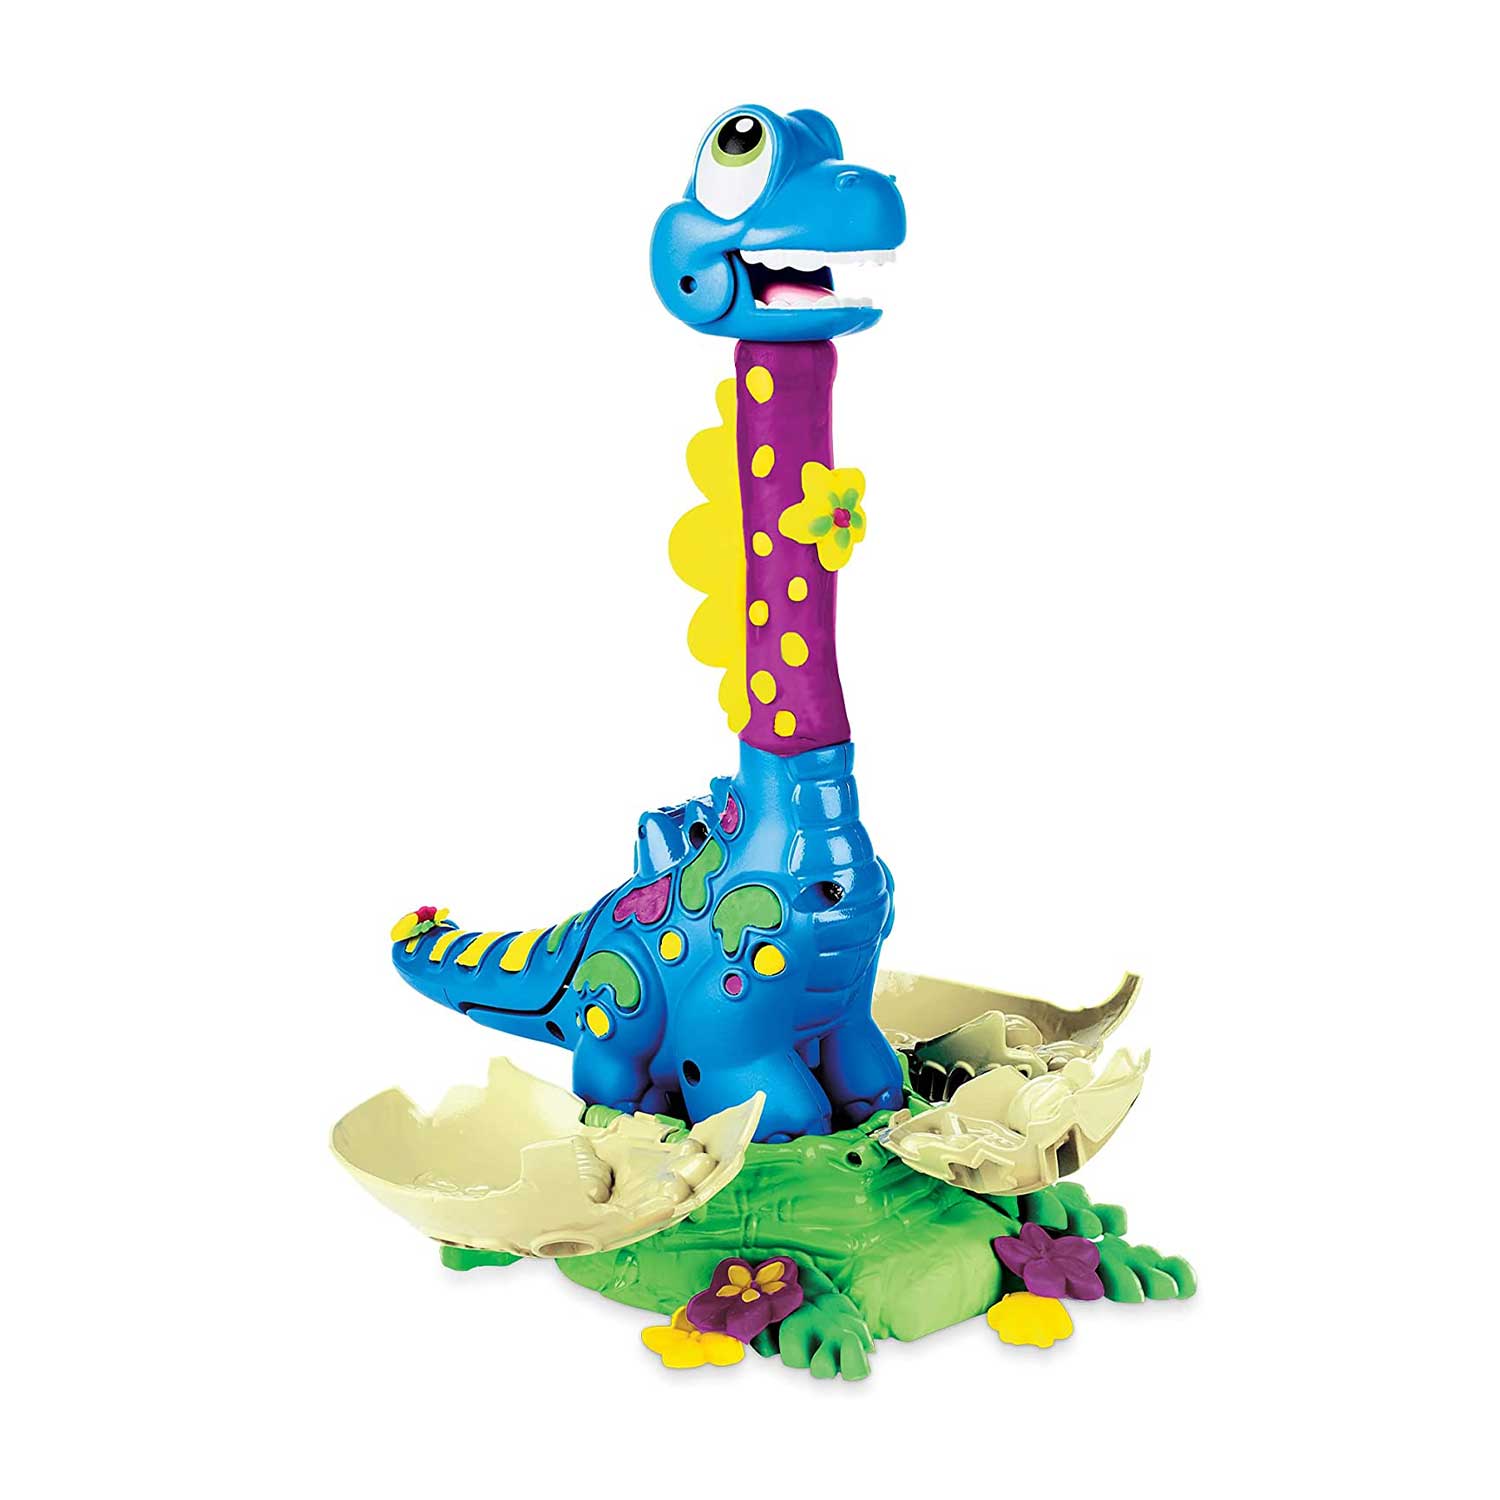 Play-Doh Dino Crew Growin' Tall Bronto Toy Dinosaur for Kids 3 Years and Up with 2 Play-Doh Eggs - Mod: HSBF15035L0